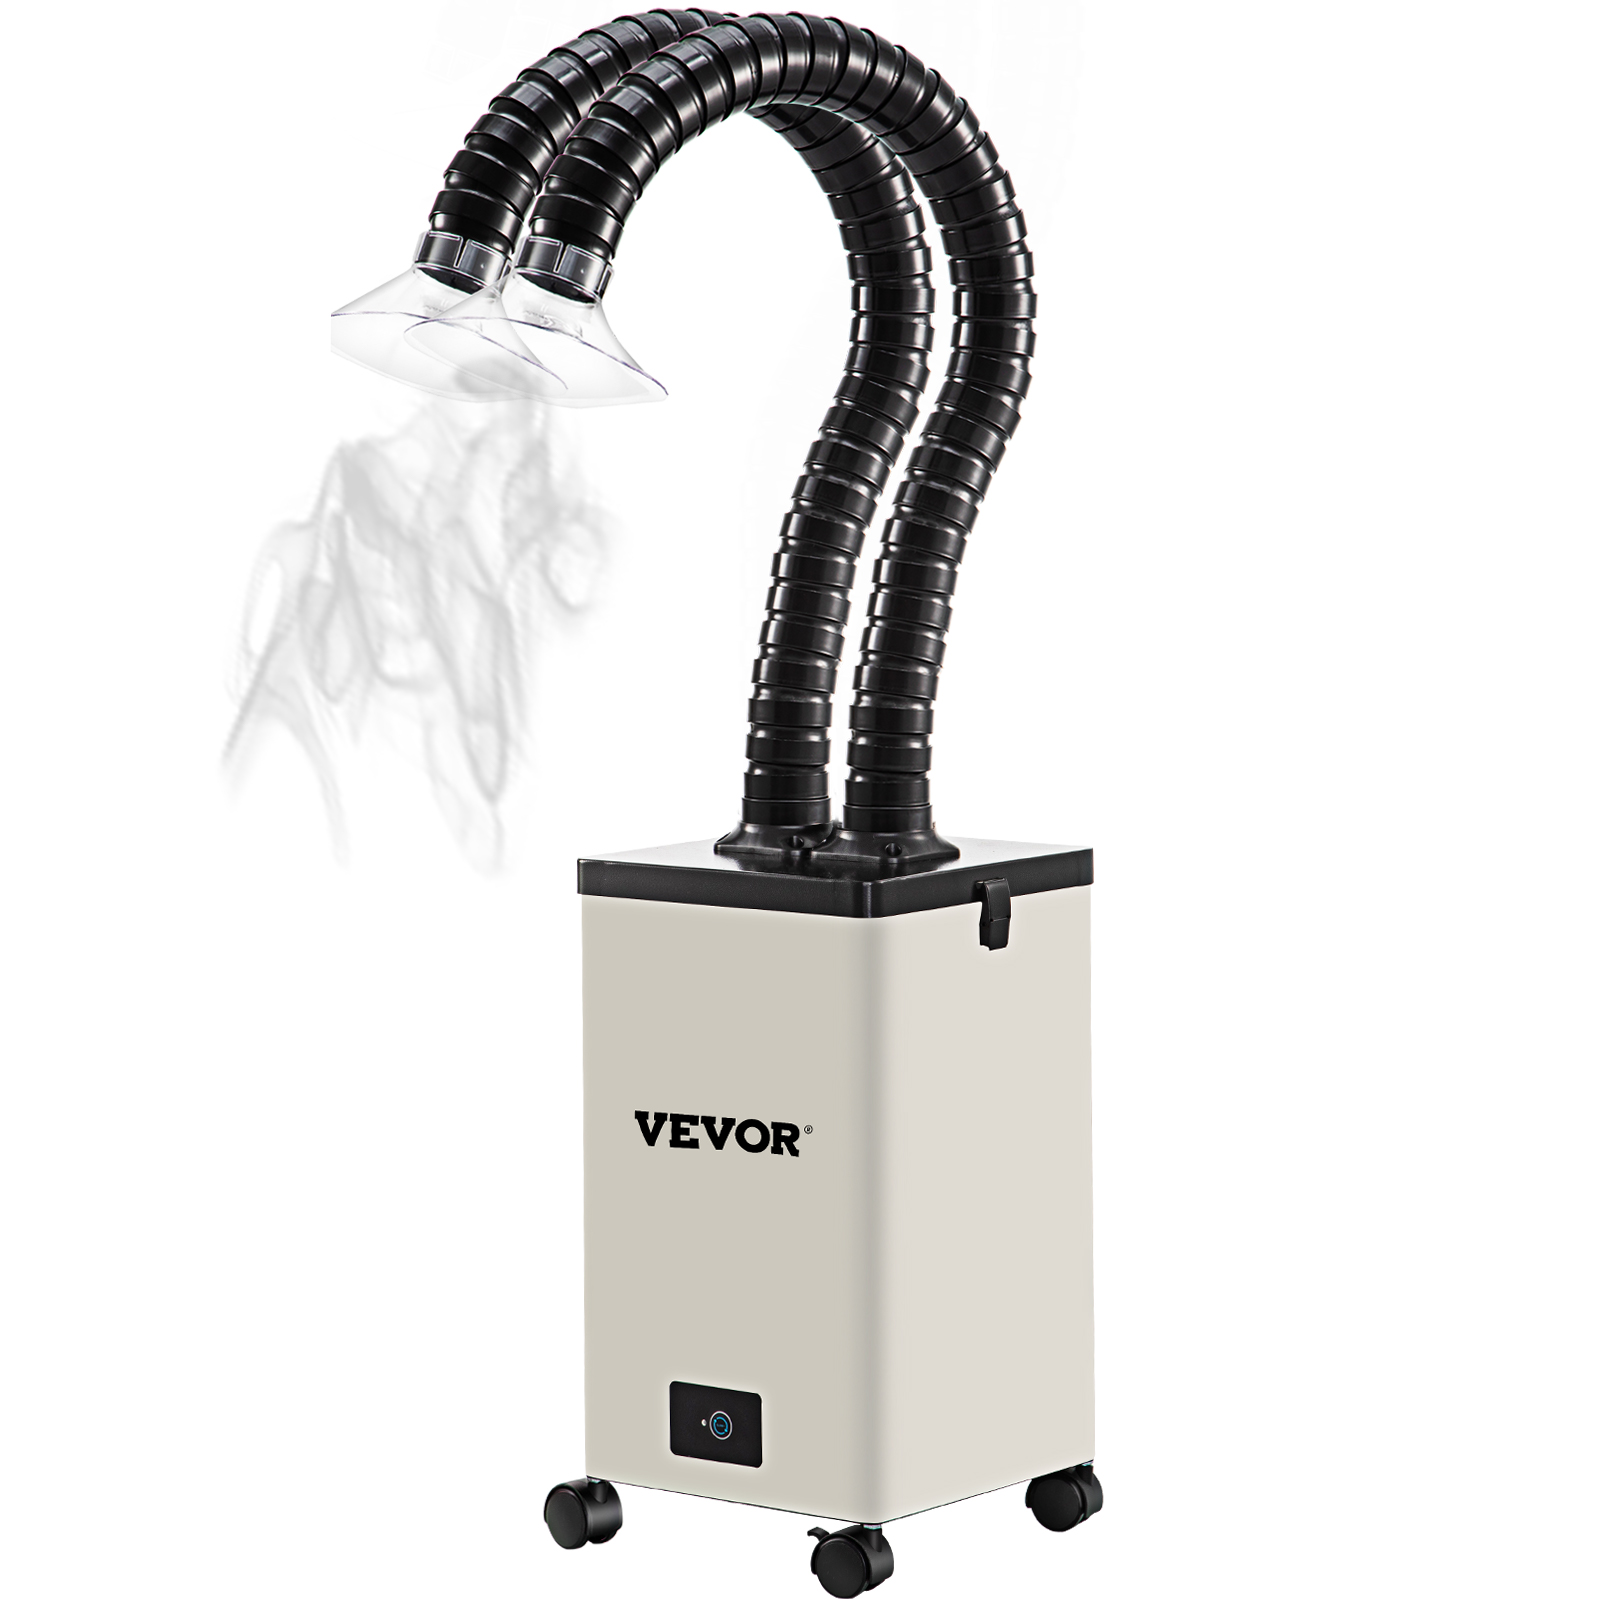 fume extractor,330W,6 stage filters